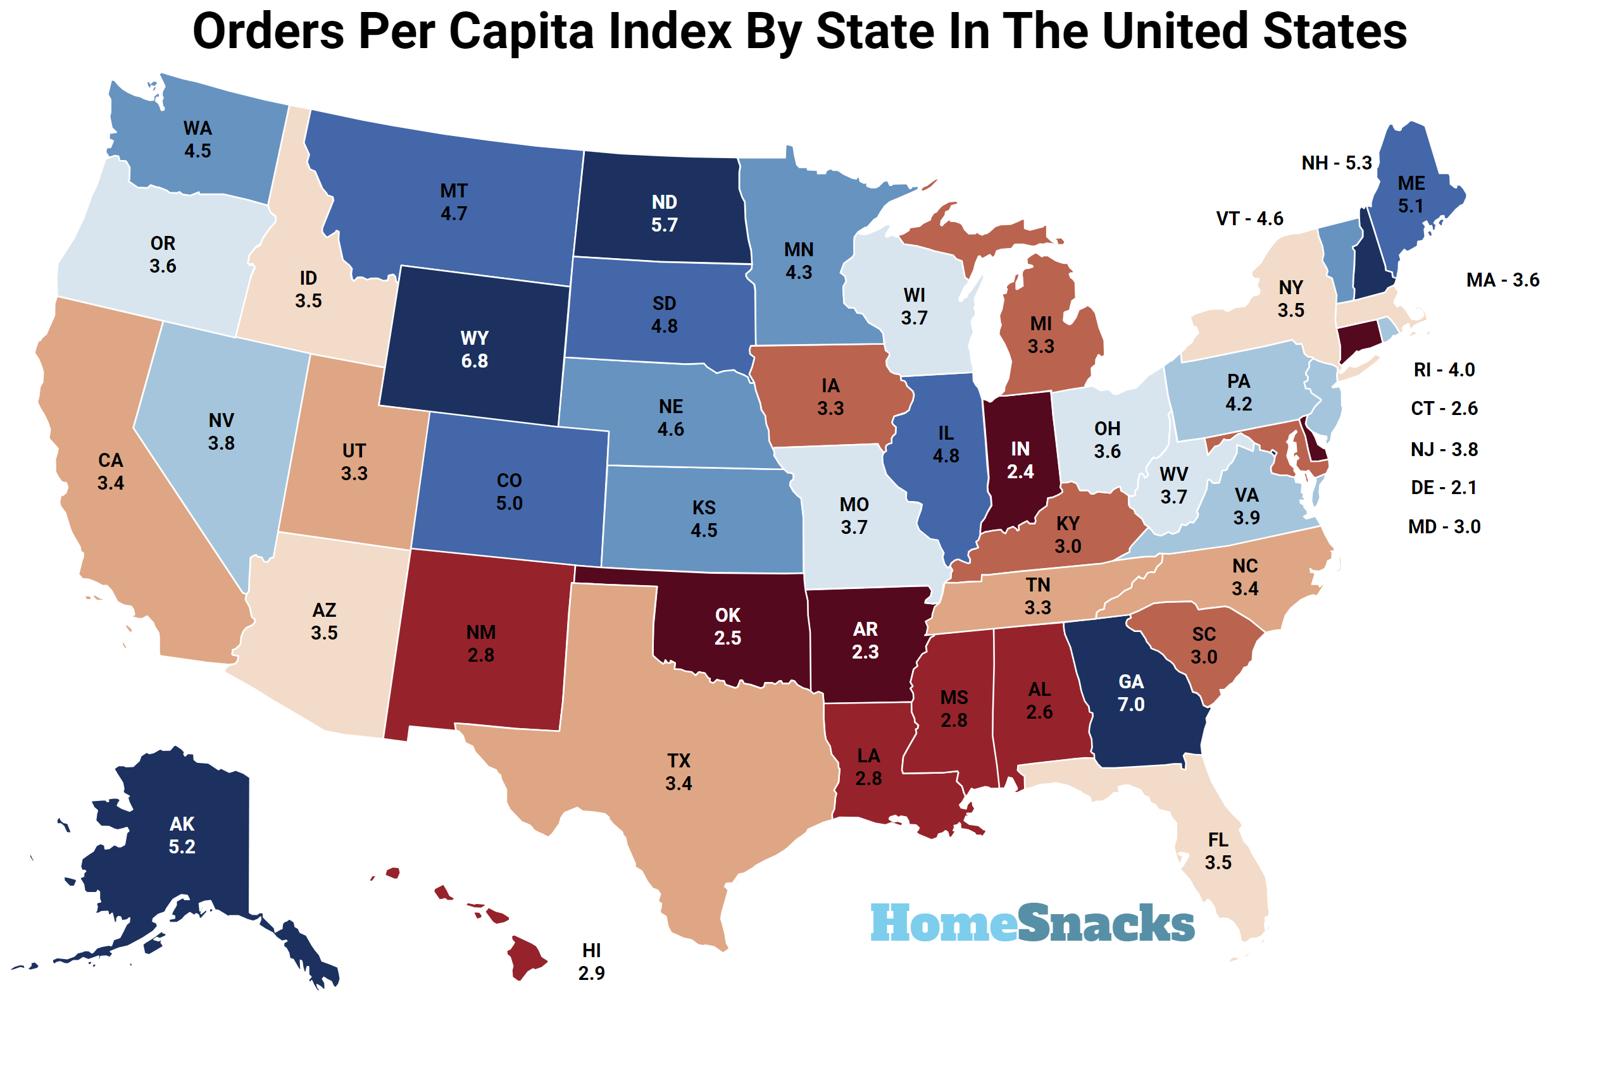 Orders Per Capita By State In The United States